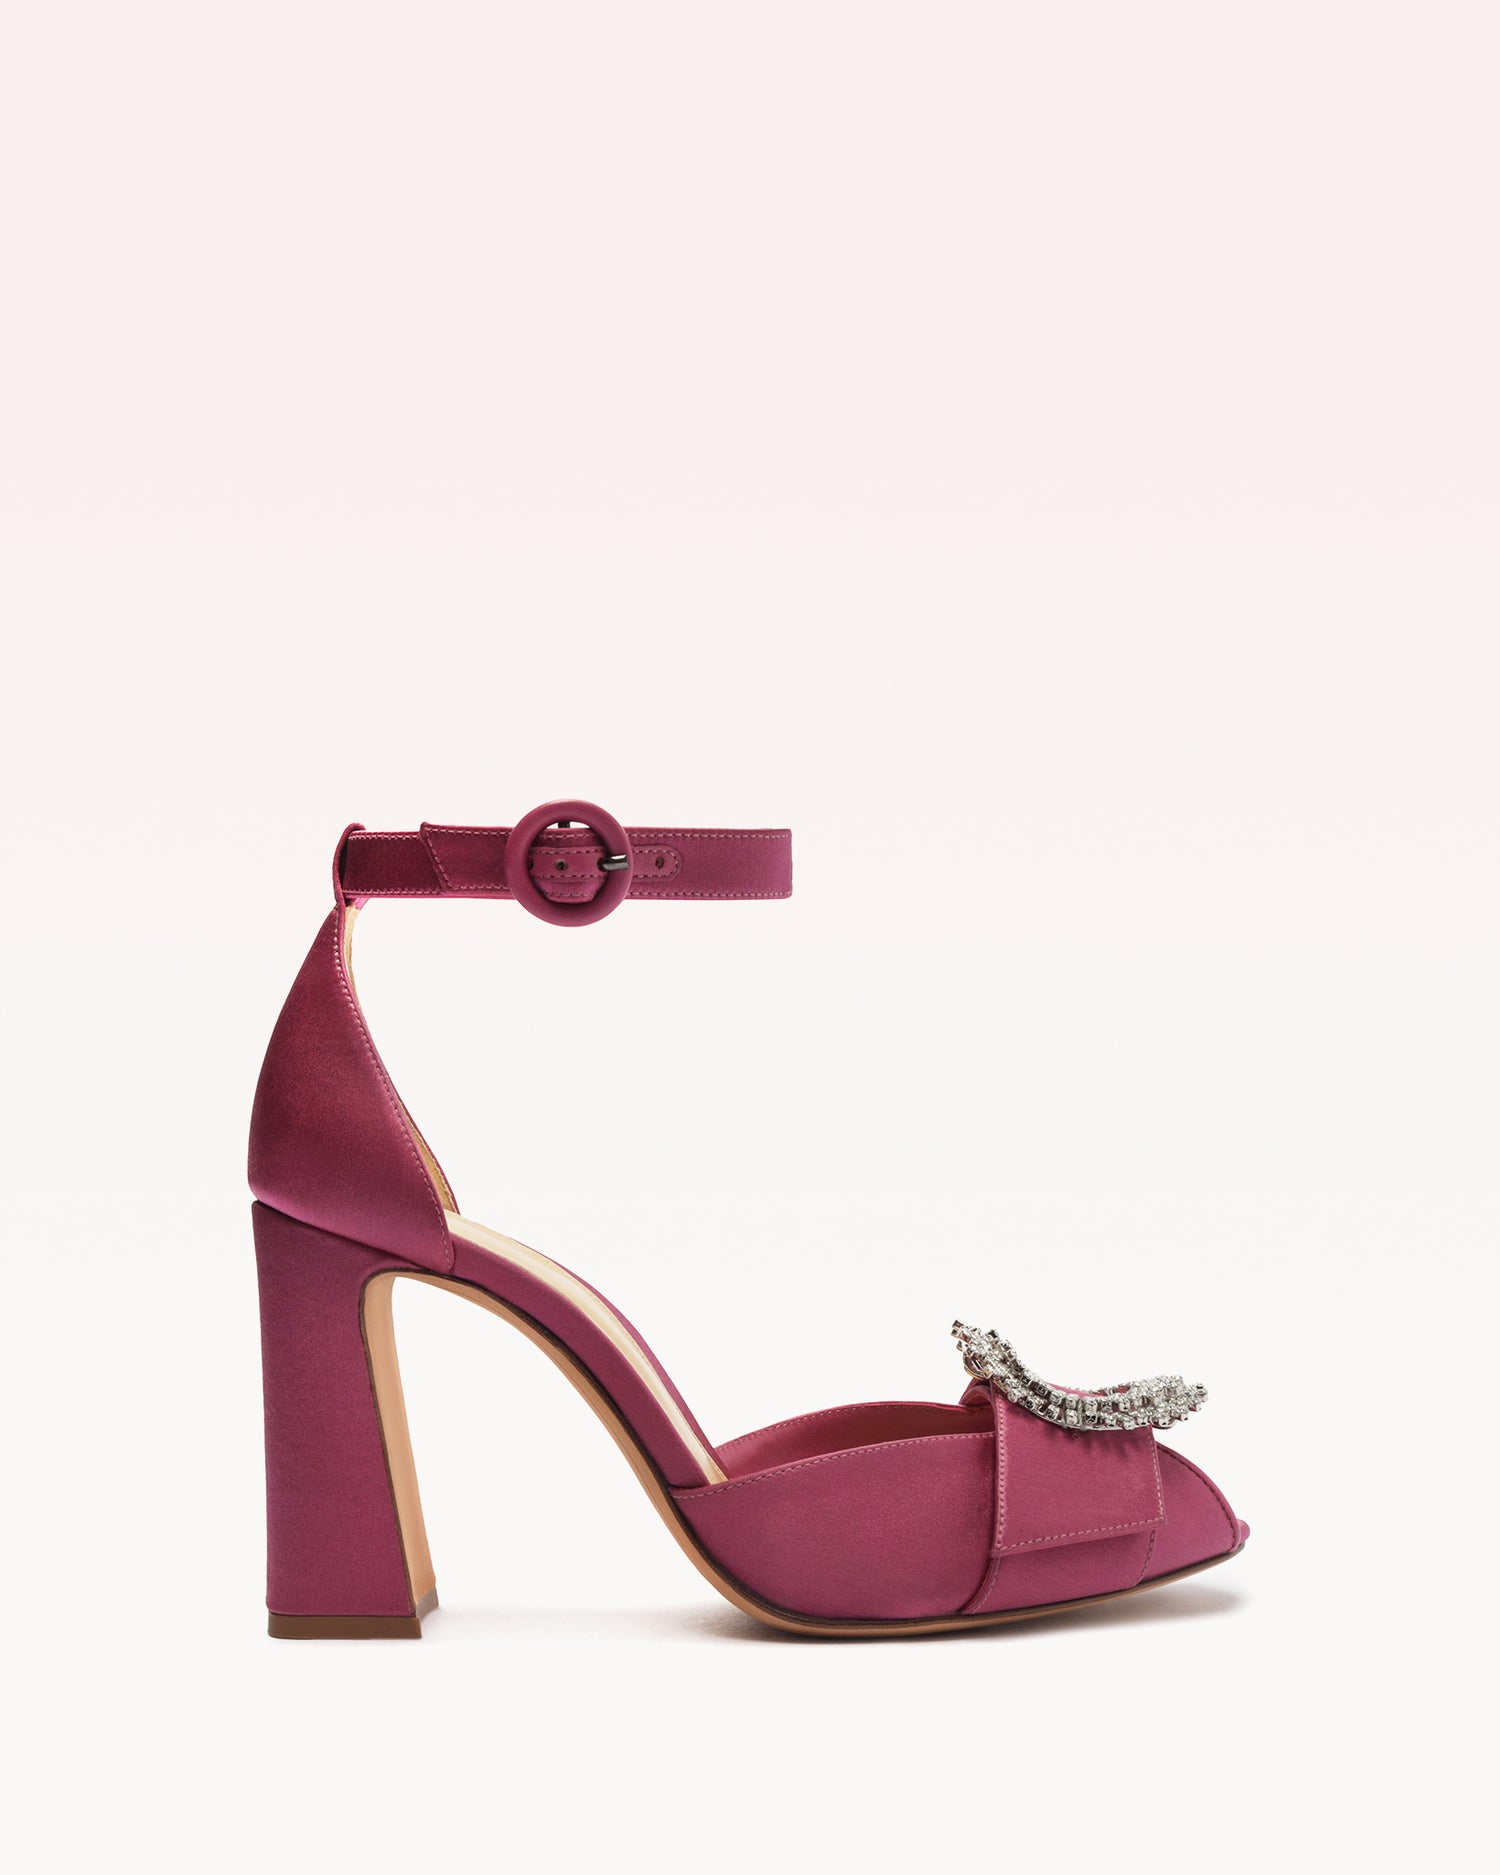 Madelina Curve 90 Pale Cherry Sandals F/23 35 Pale Cherry Satin/Crystal